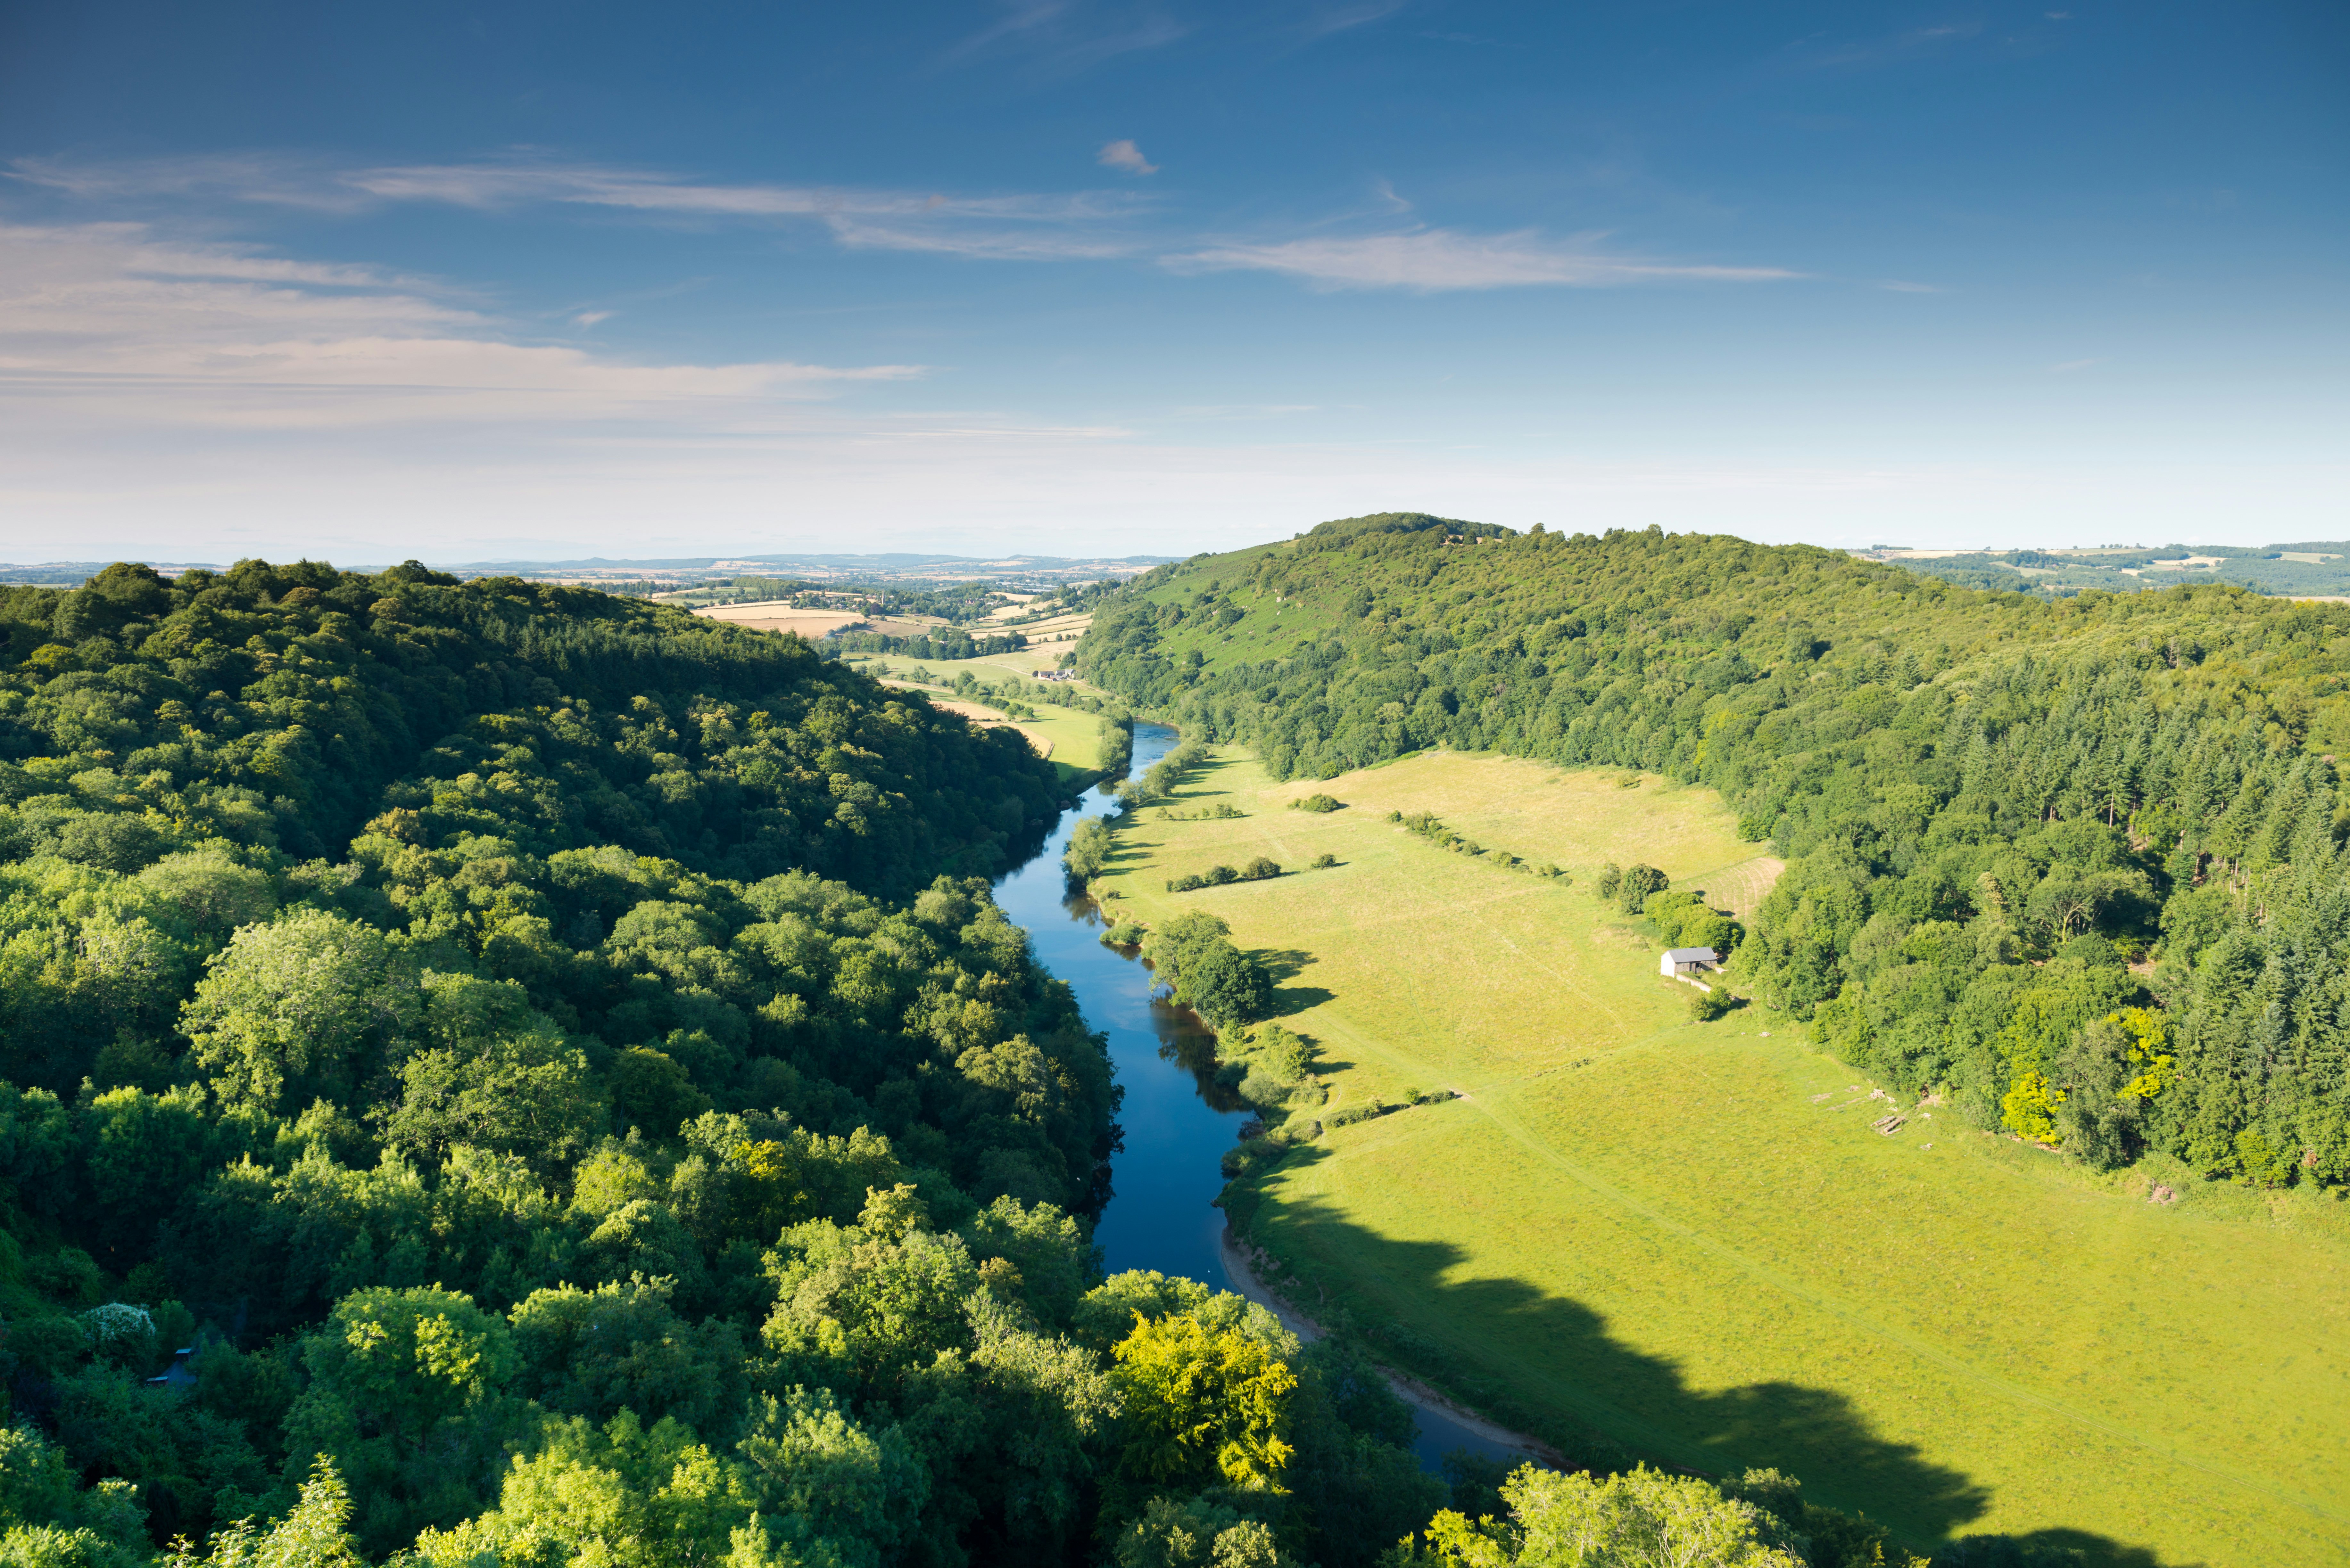 River Wye with rural farmland on one side and forest on the other.